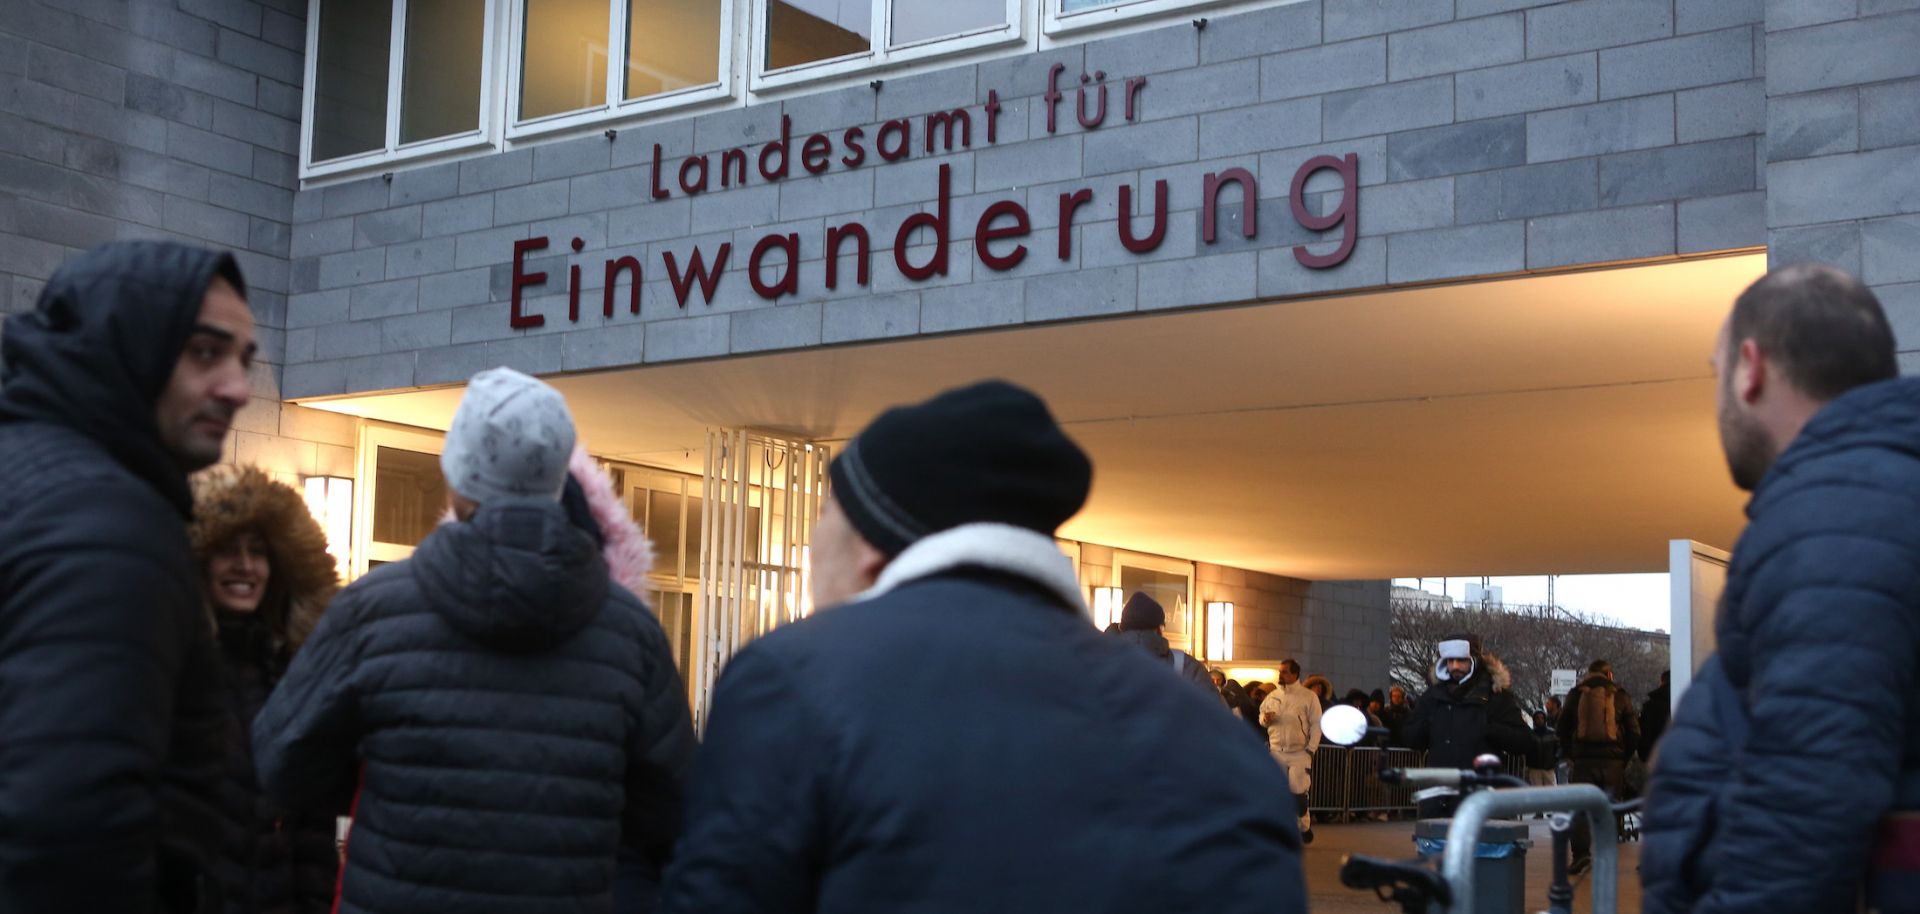 Foreigners wait outside the immigration office in Berlin, Germany, for assistance in regulating their legal residency status on Feb. 6, 2020.